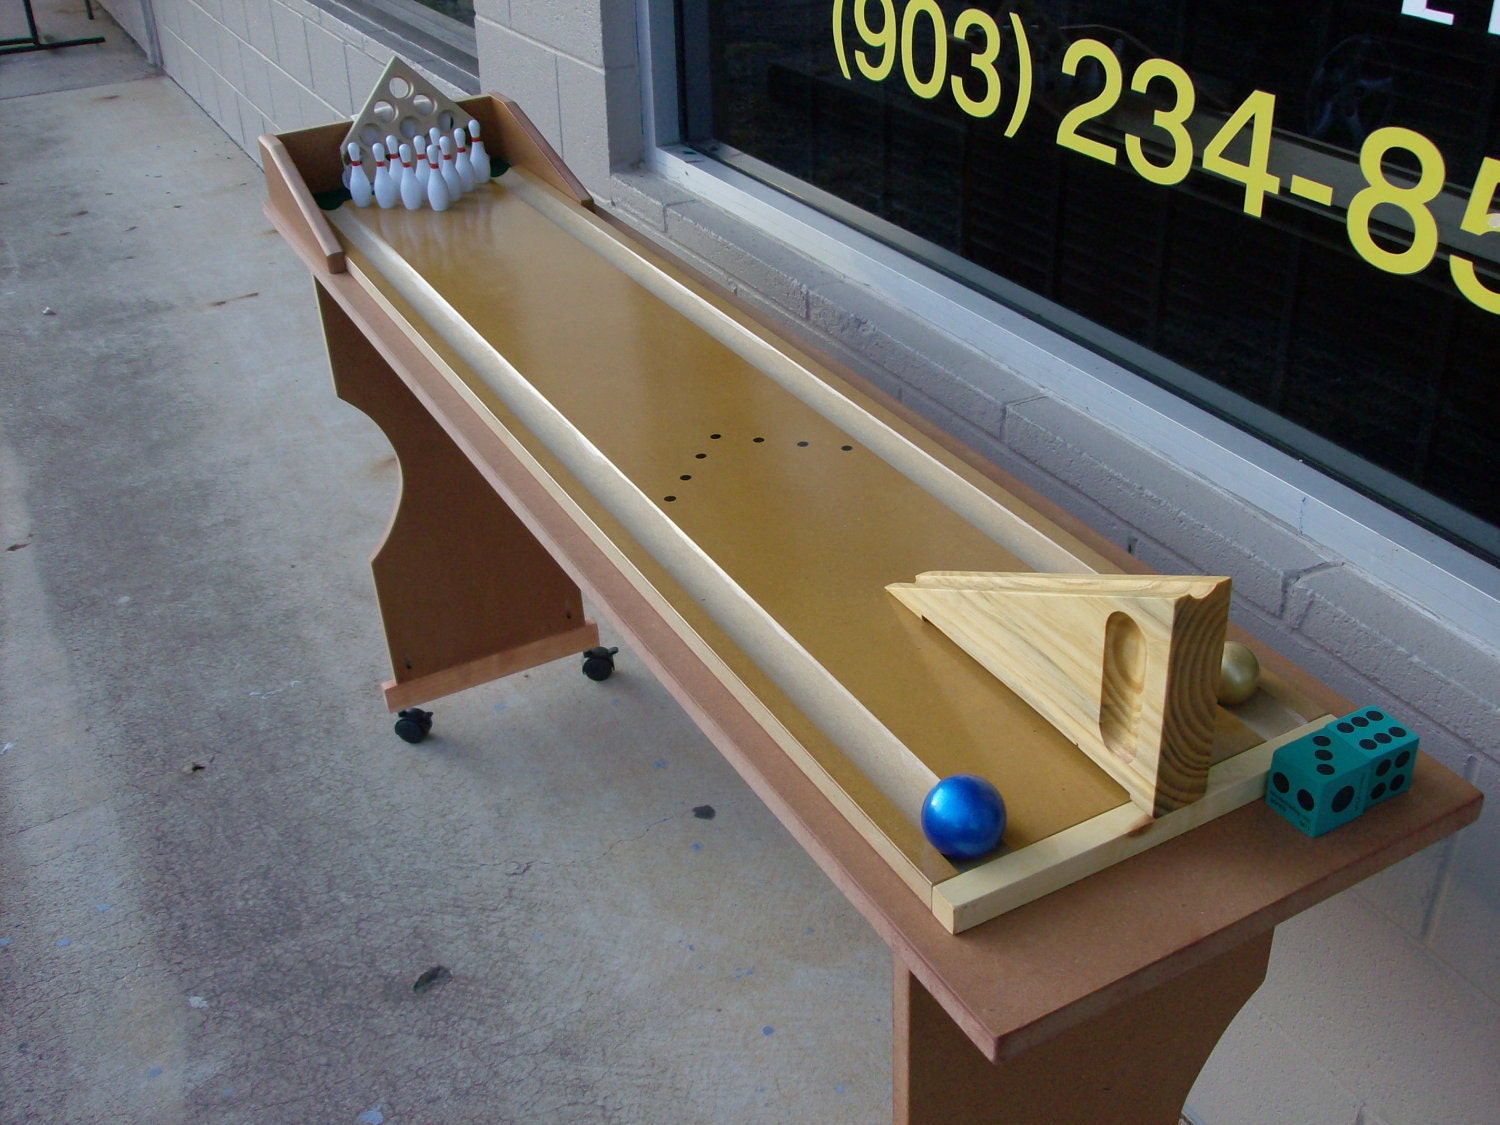 Cue Bowling Championship Table Top Bowling Game With Ball